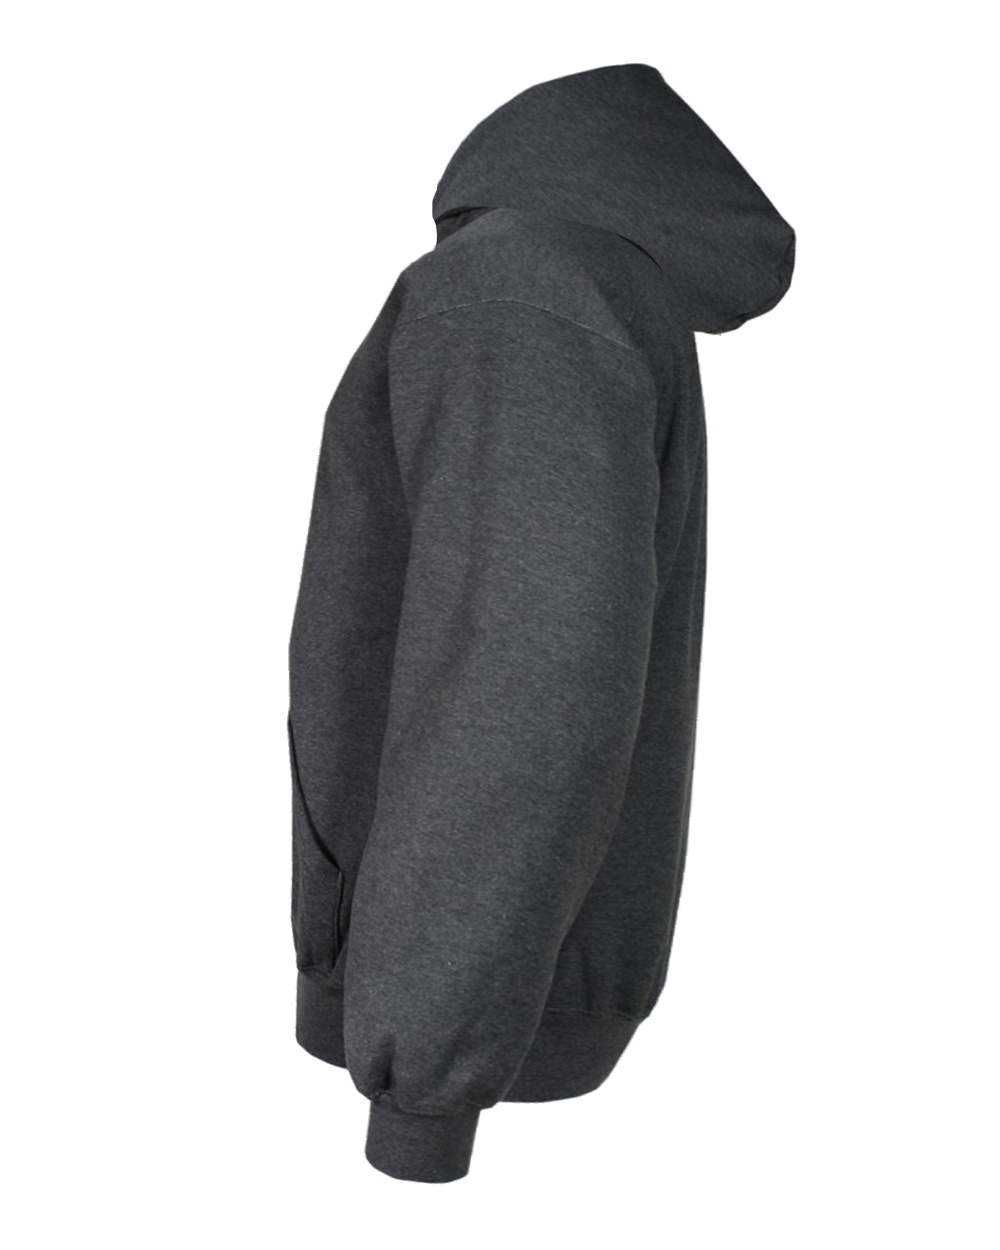 Badger Sport 2254 Youth Hooded Sweatshirt - Charcoal - HIT a Double - 1